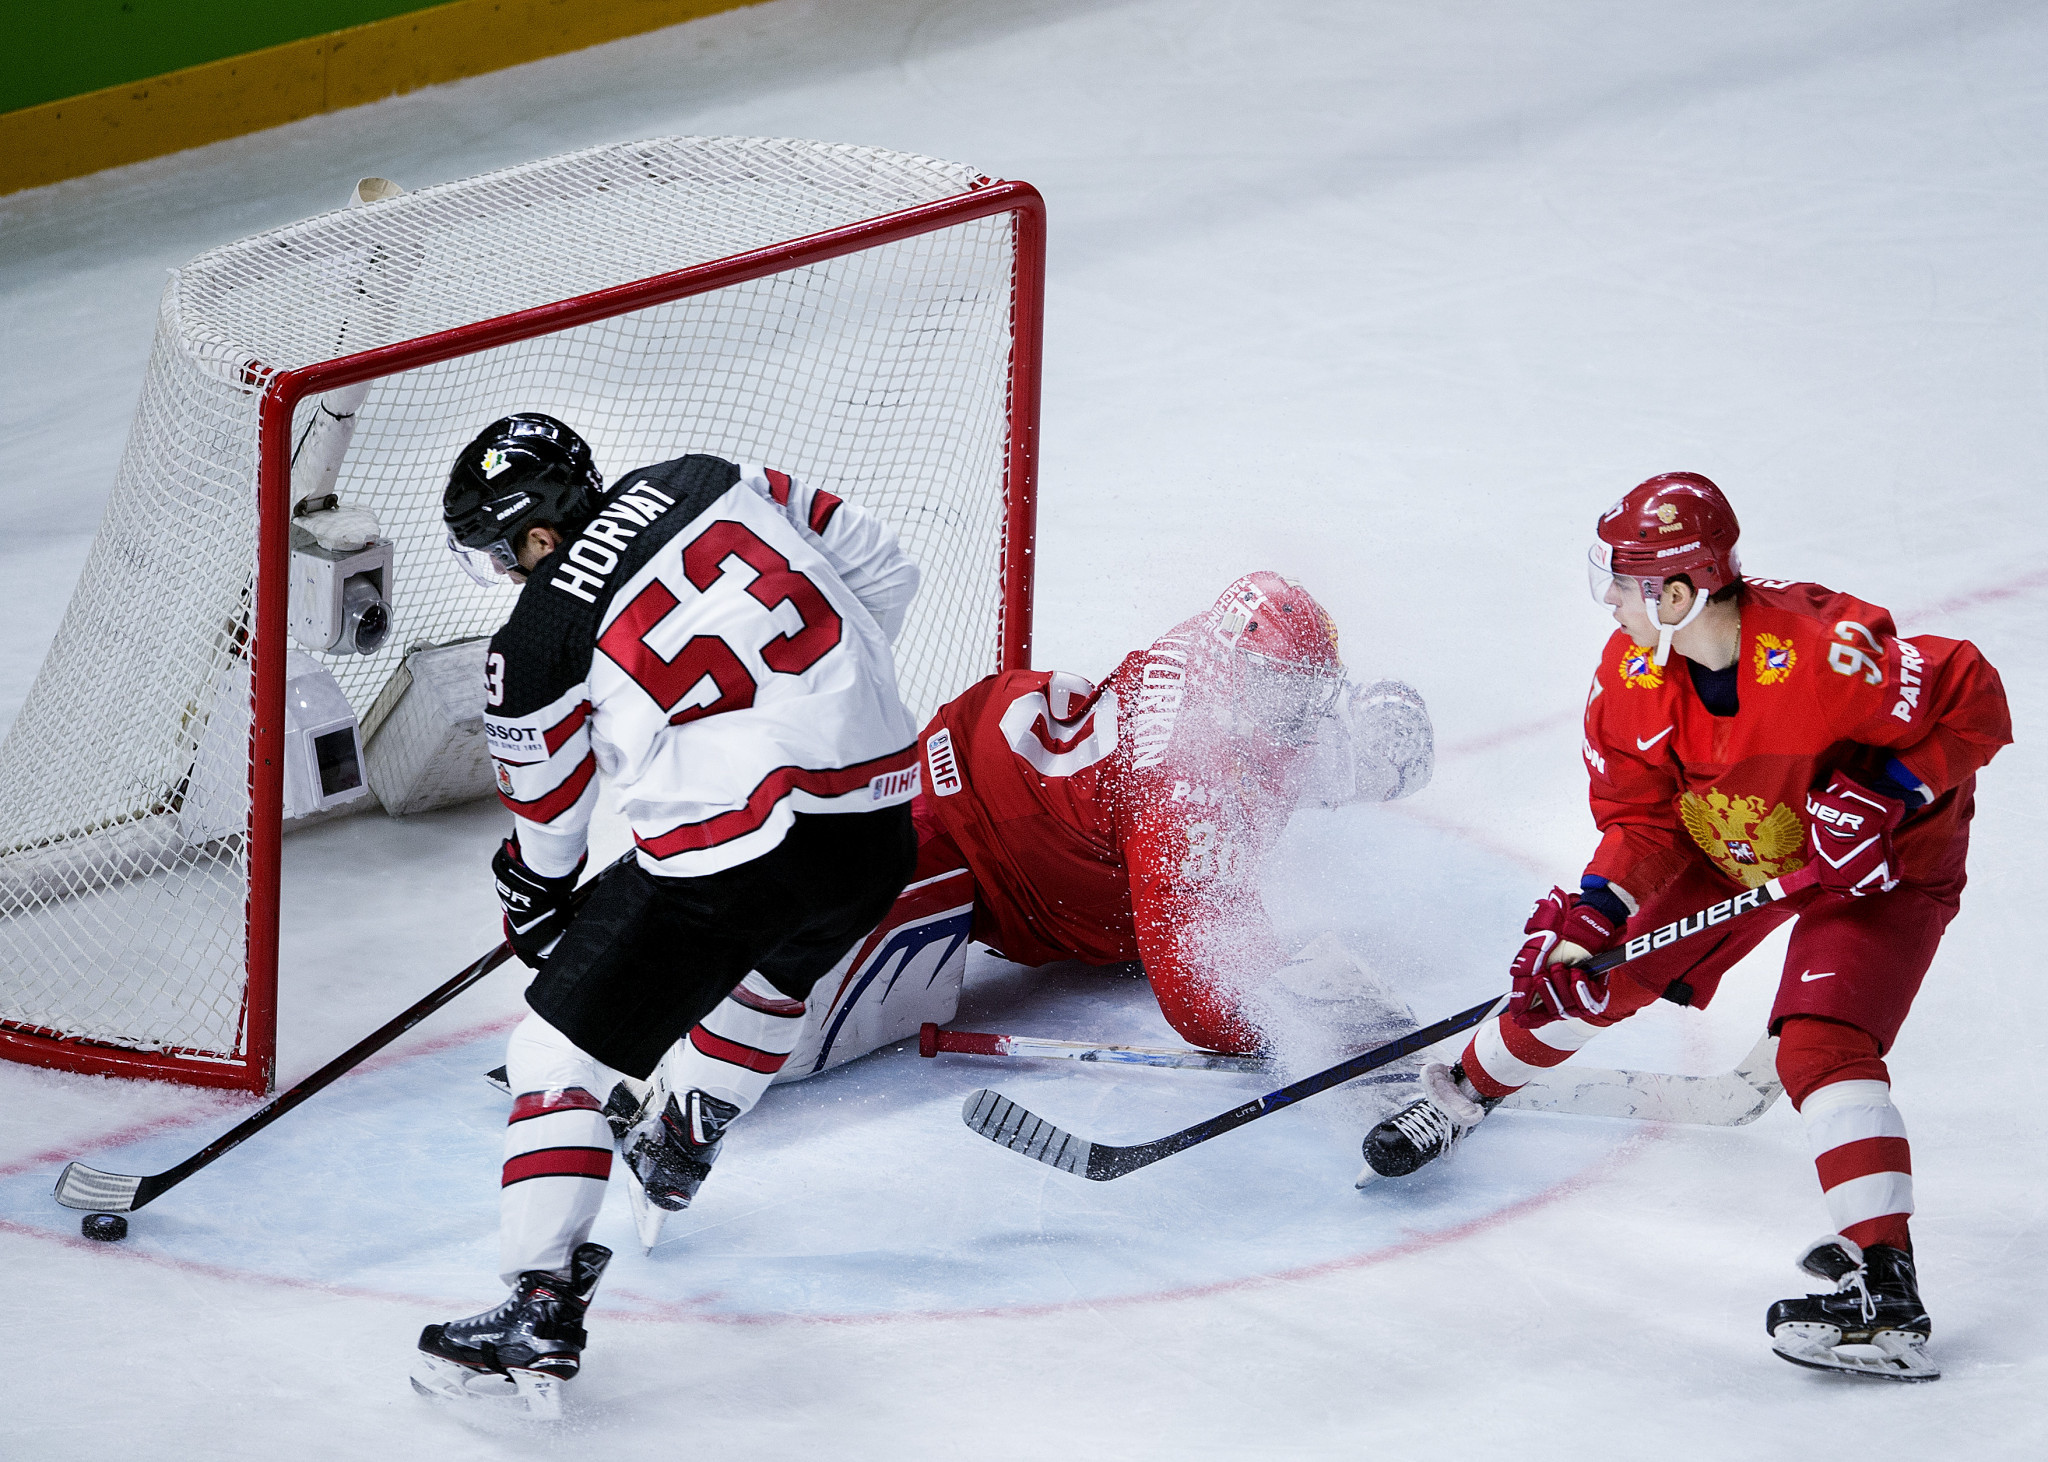 Canada earned an overtime victory against Russia to reach the semi-finals ©Getty Images